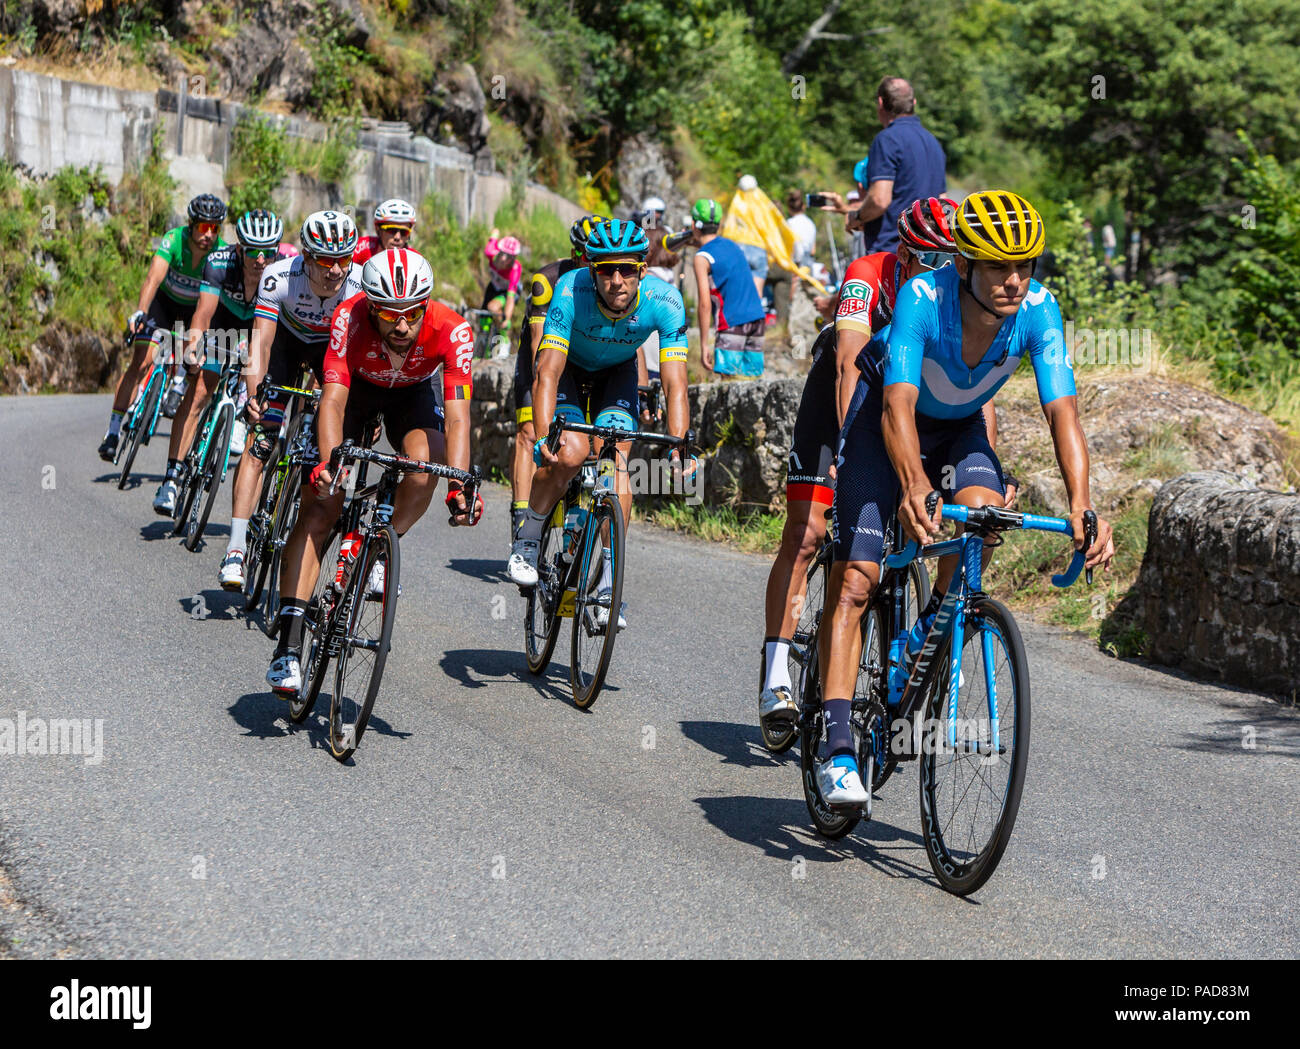 Pont-de-Montvert-Sud-Mont-Lozere, France - July 21, 2018: Group of cyclists including Omar Fraile of Astana Team, the winner of this stage, descending a road in Occitan region during the stage 14 of Tour de France 2018. Credit: Radu Razvan/Alamy Live News Stock Photo